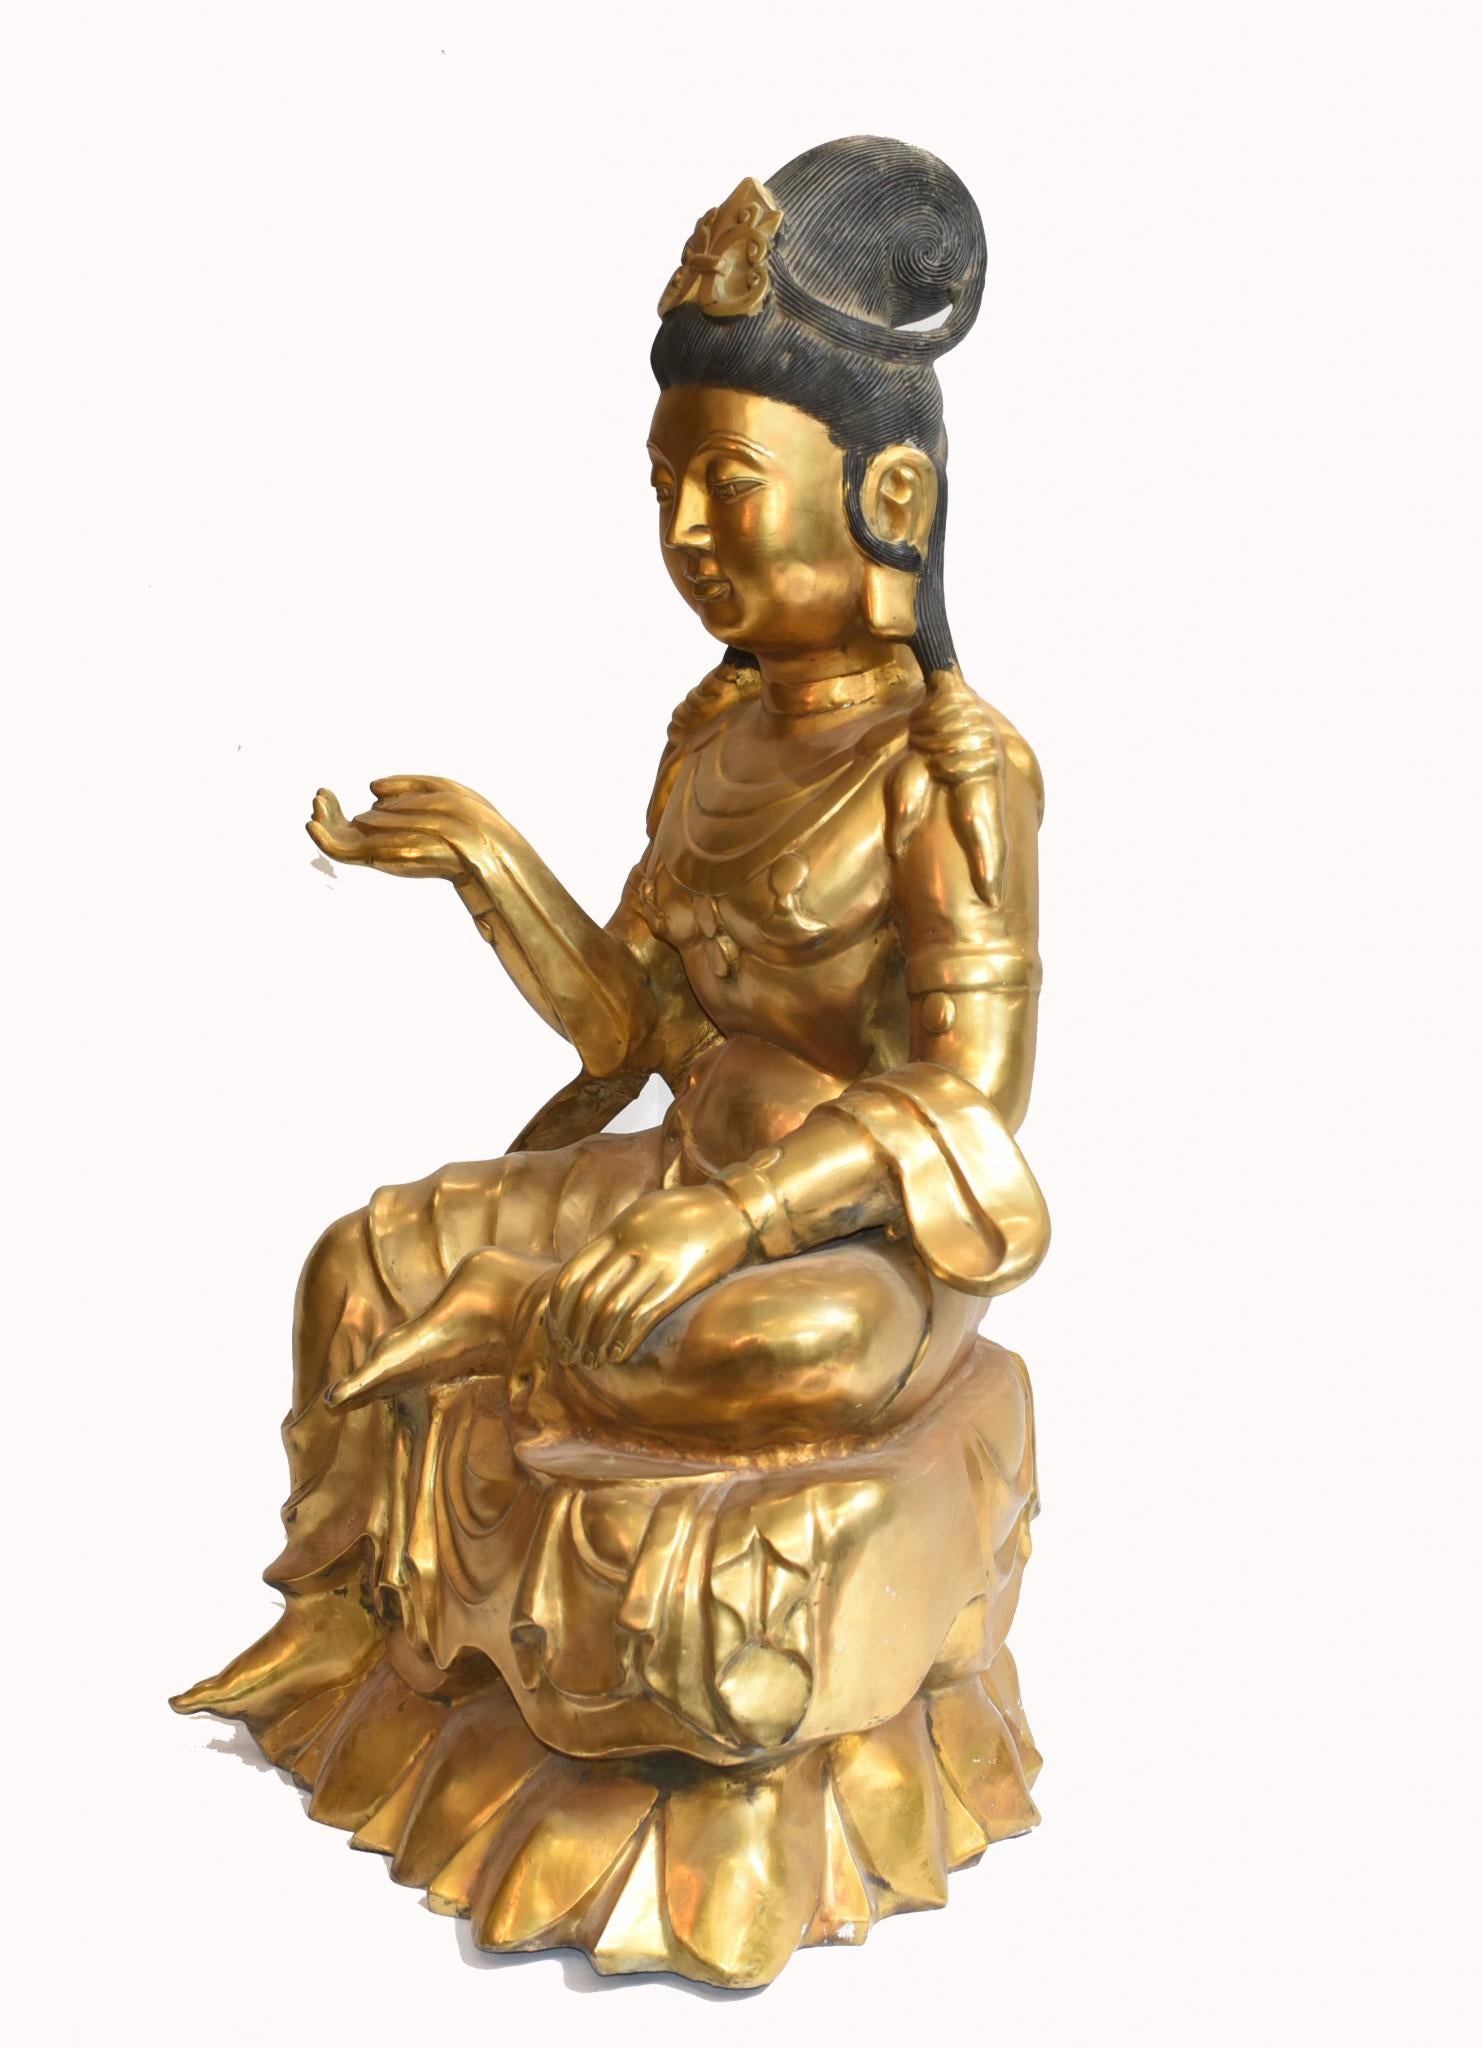 Seated Golden Buddha Statue Nepalese Meditation Bronze Sculpture For Sale 11